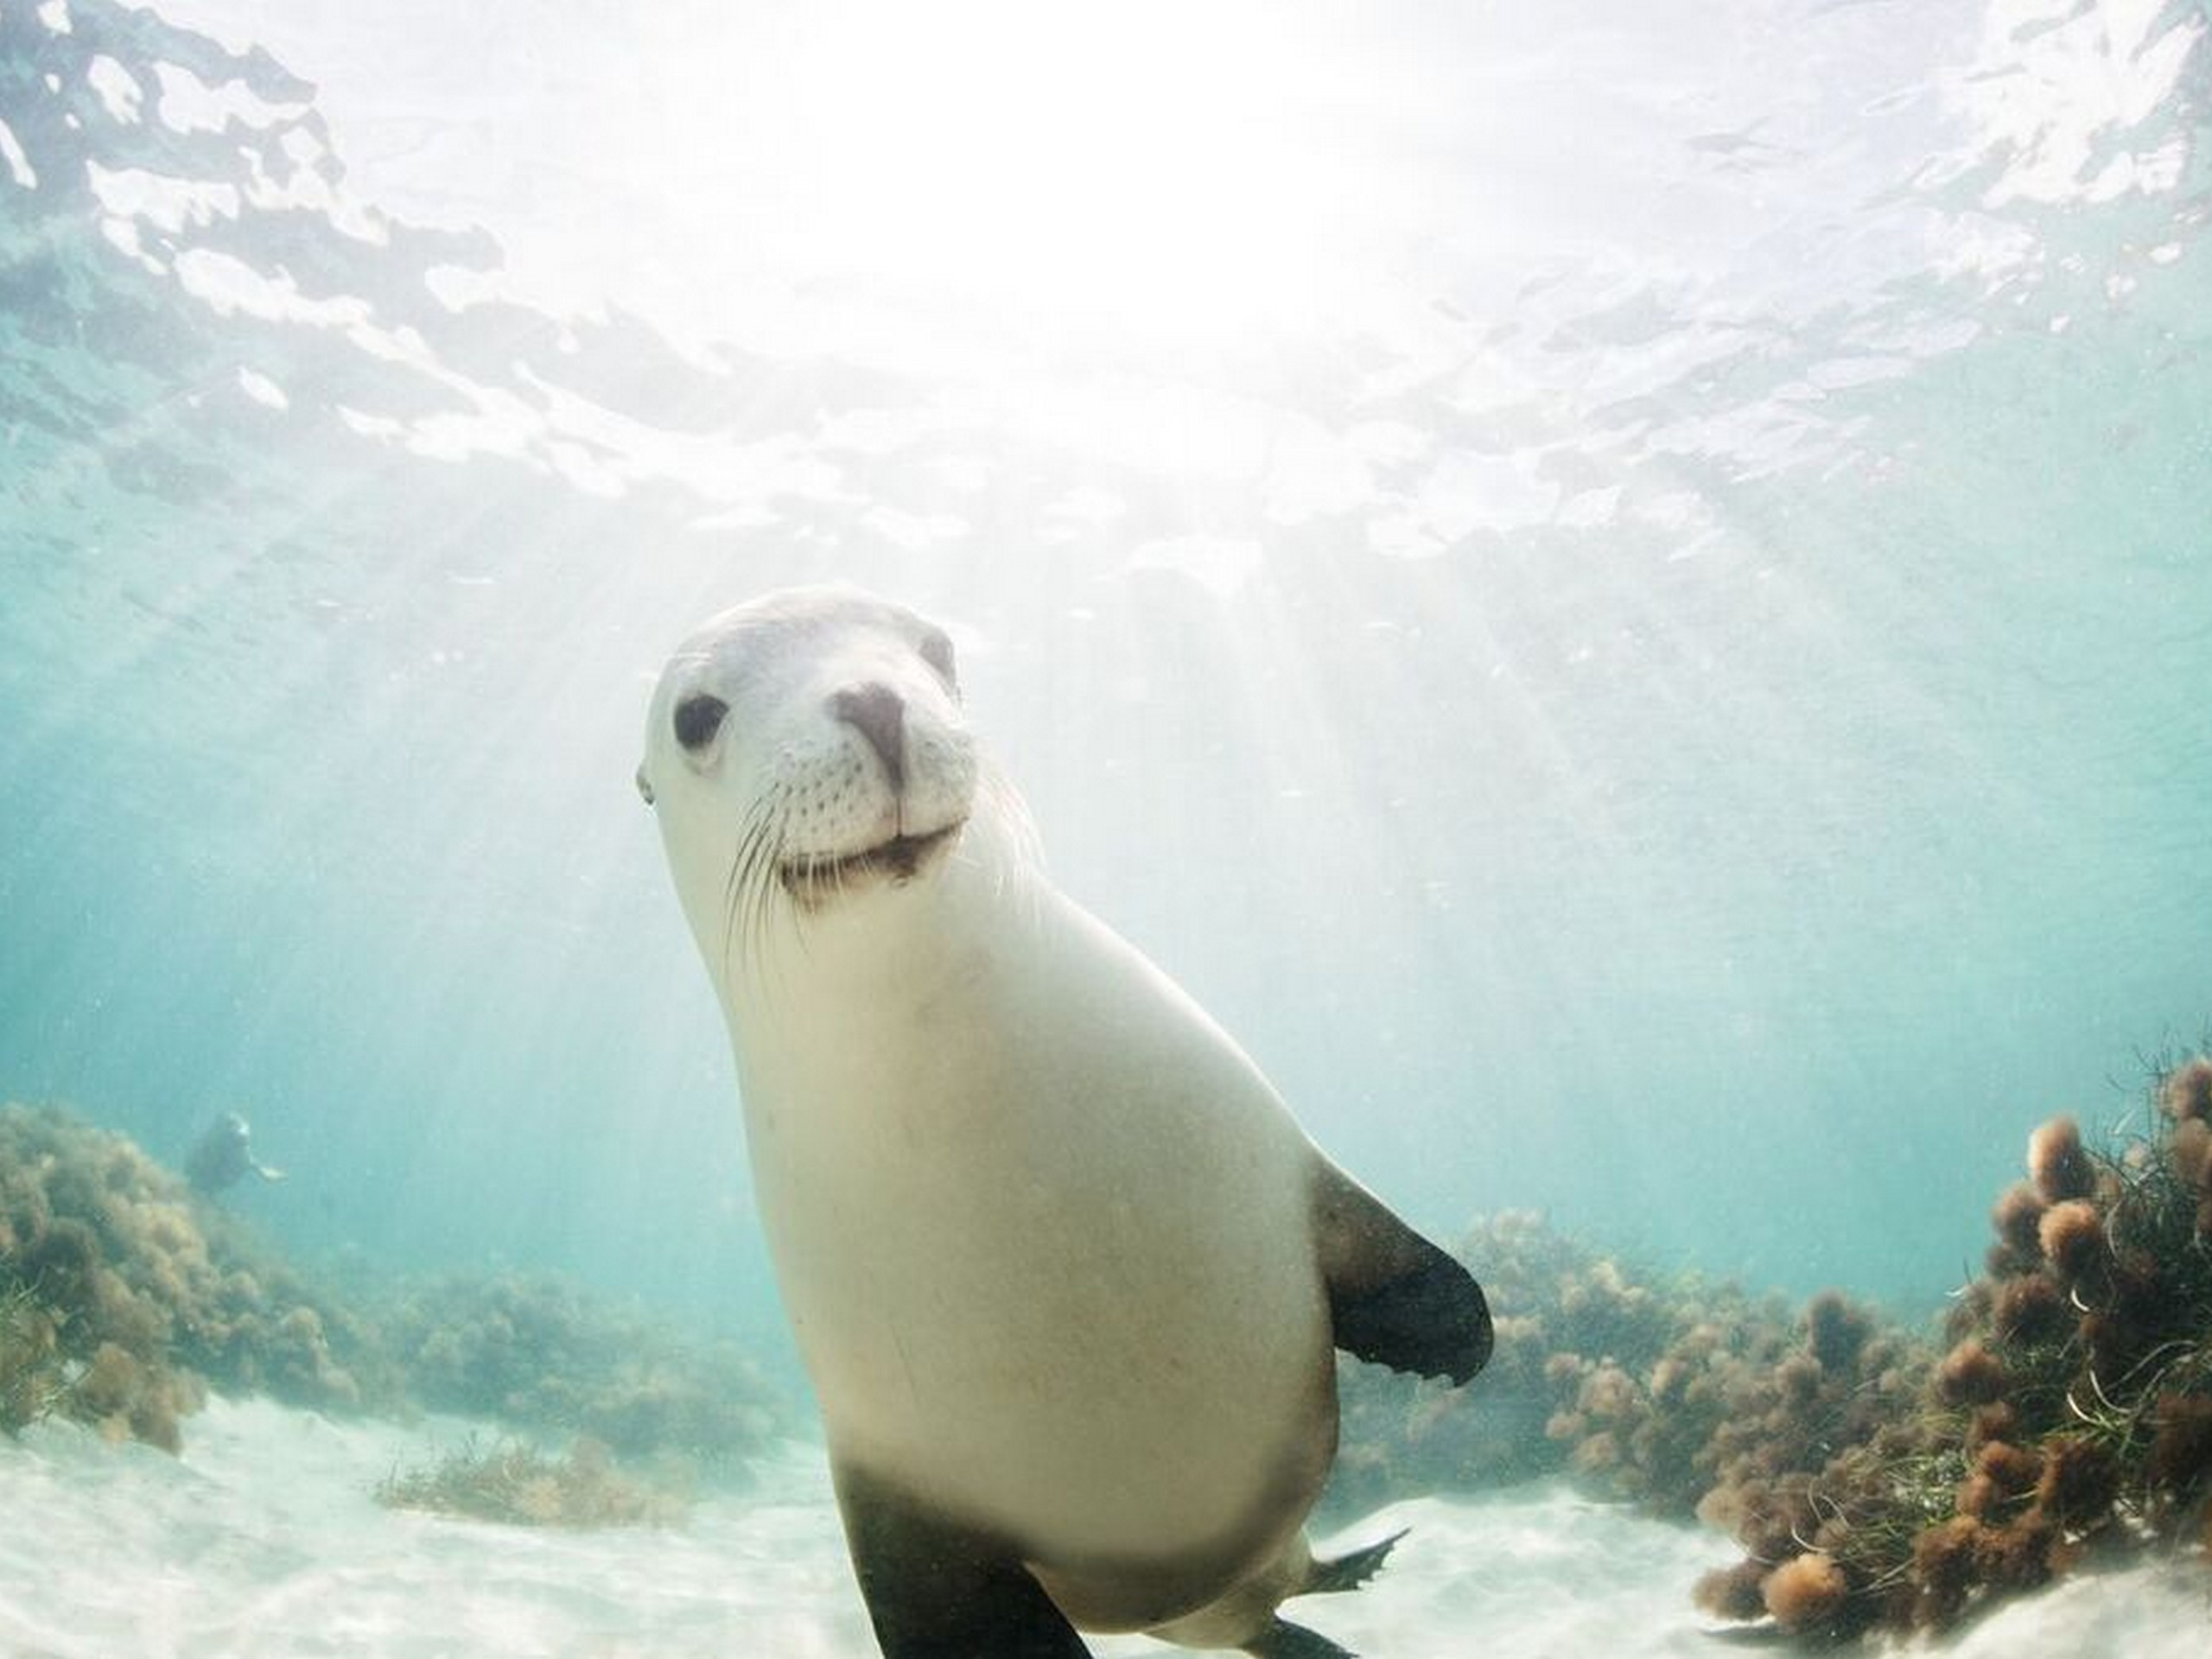 Curious sea lion met while on a guided tour in Australia